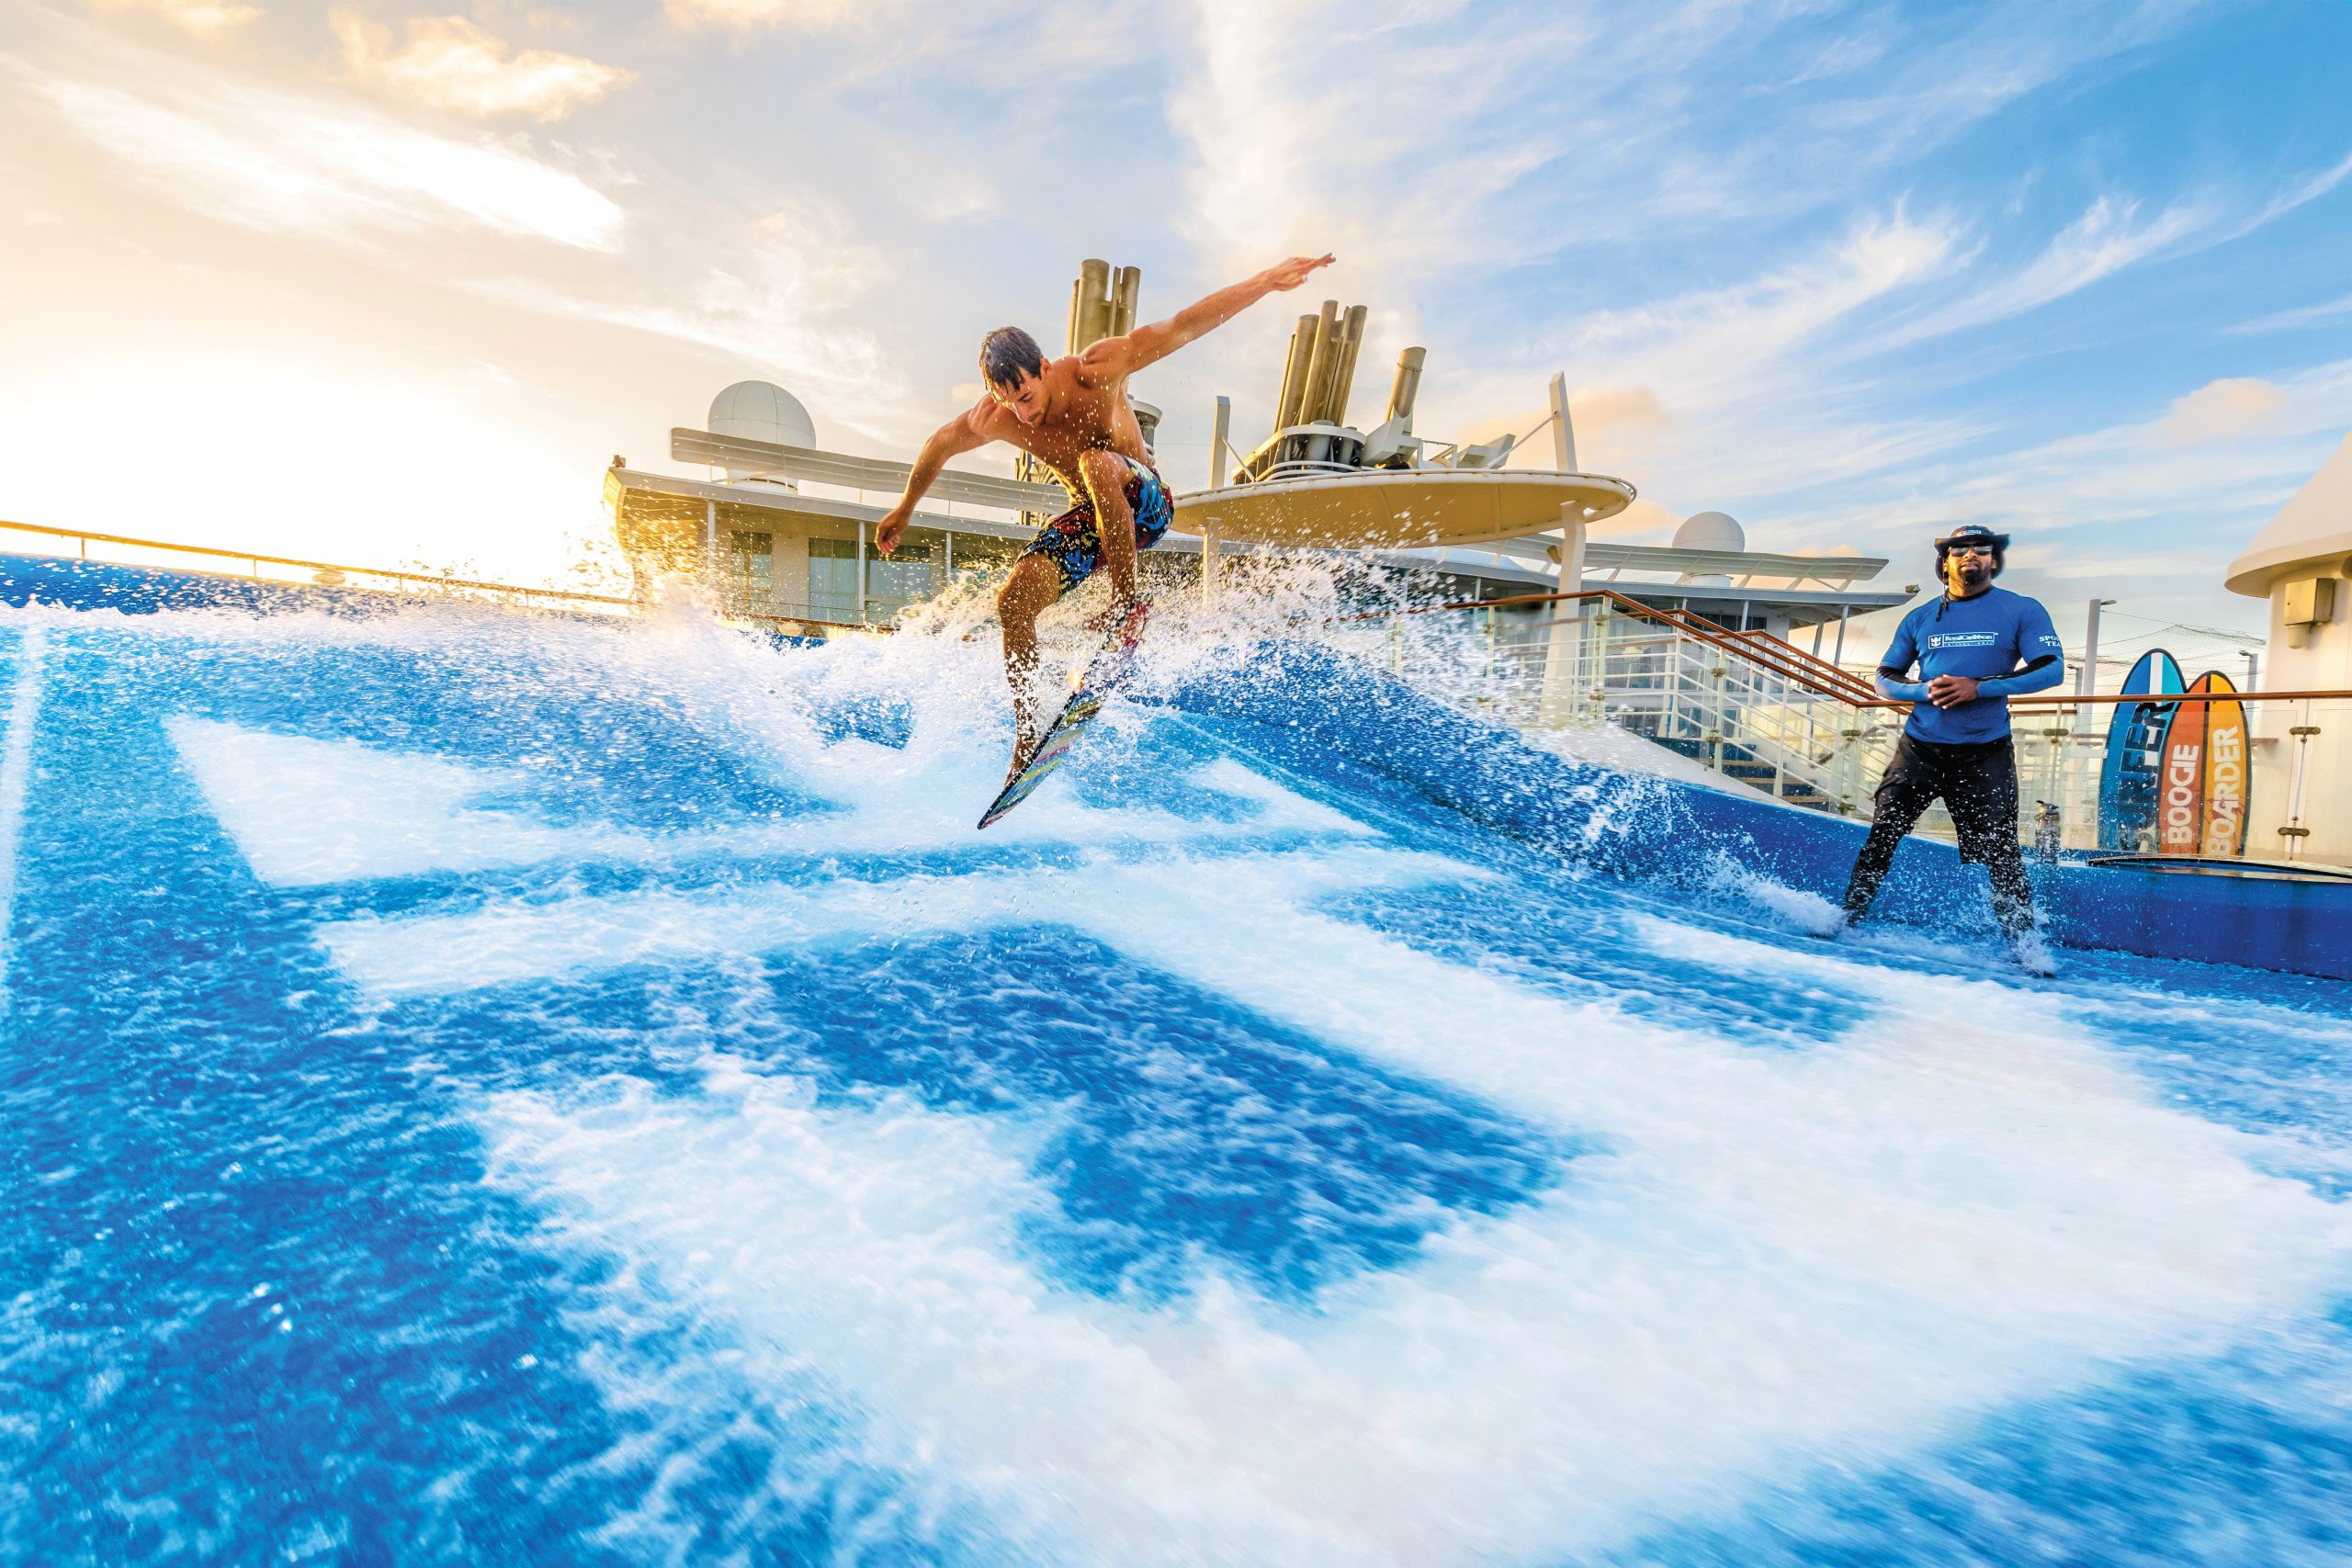 Image of man surfing in the air on a FlowRider